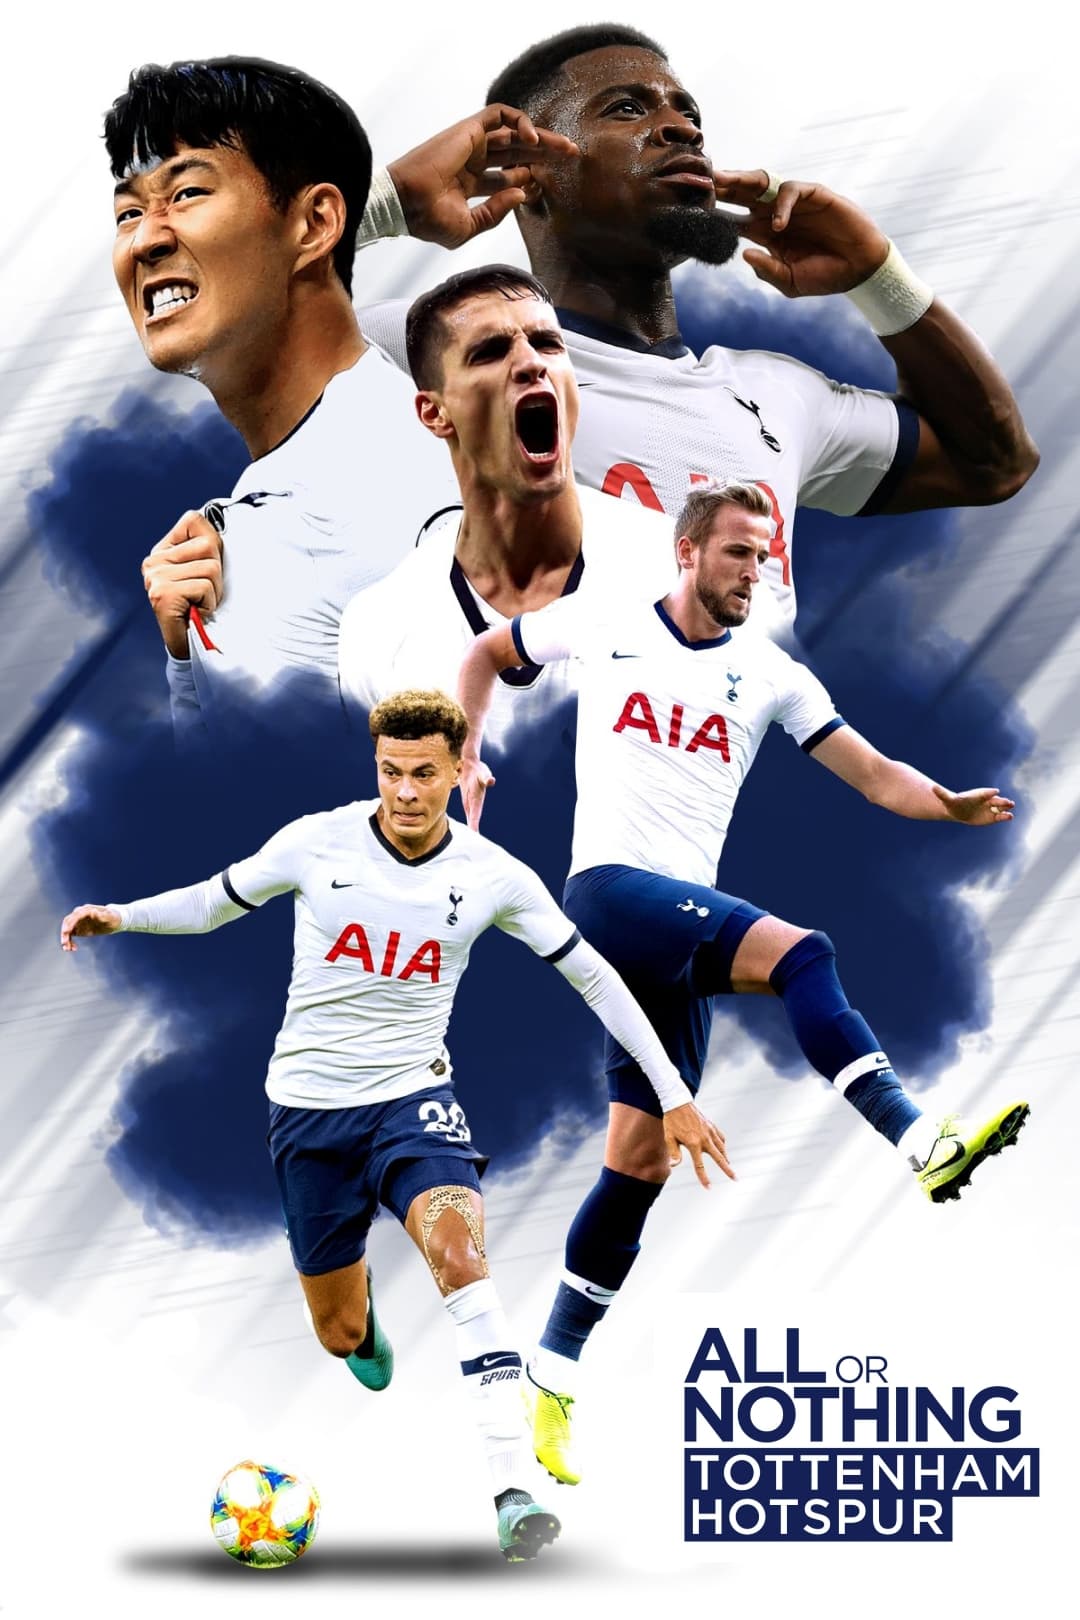 All or Nothing: Tottenham Hotspur TV Shows About Football